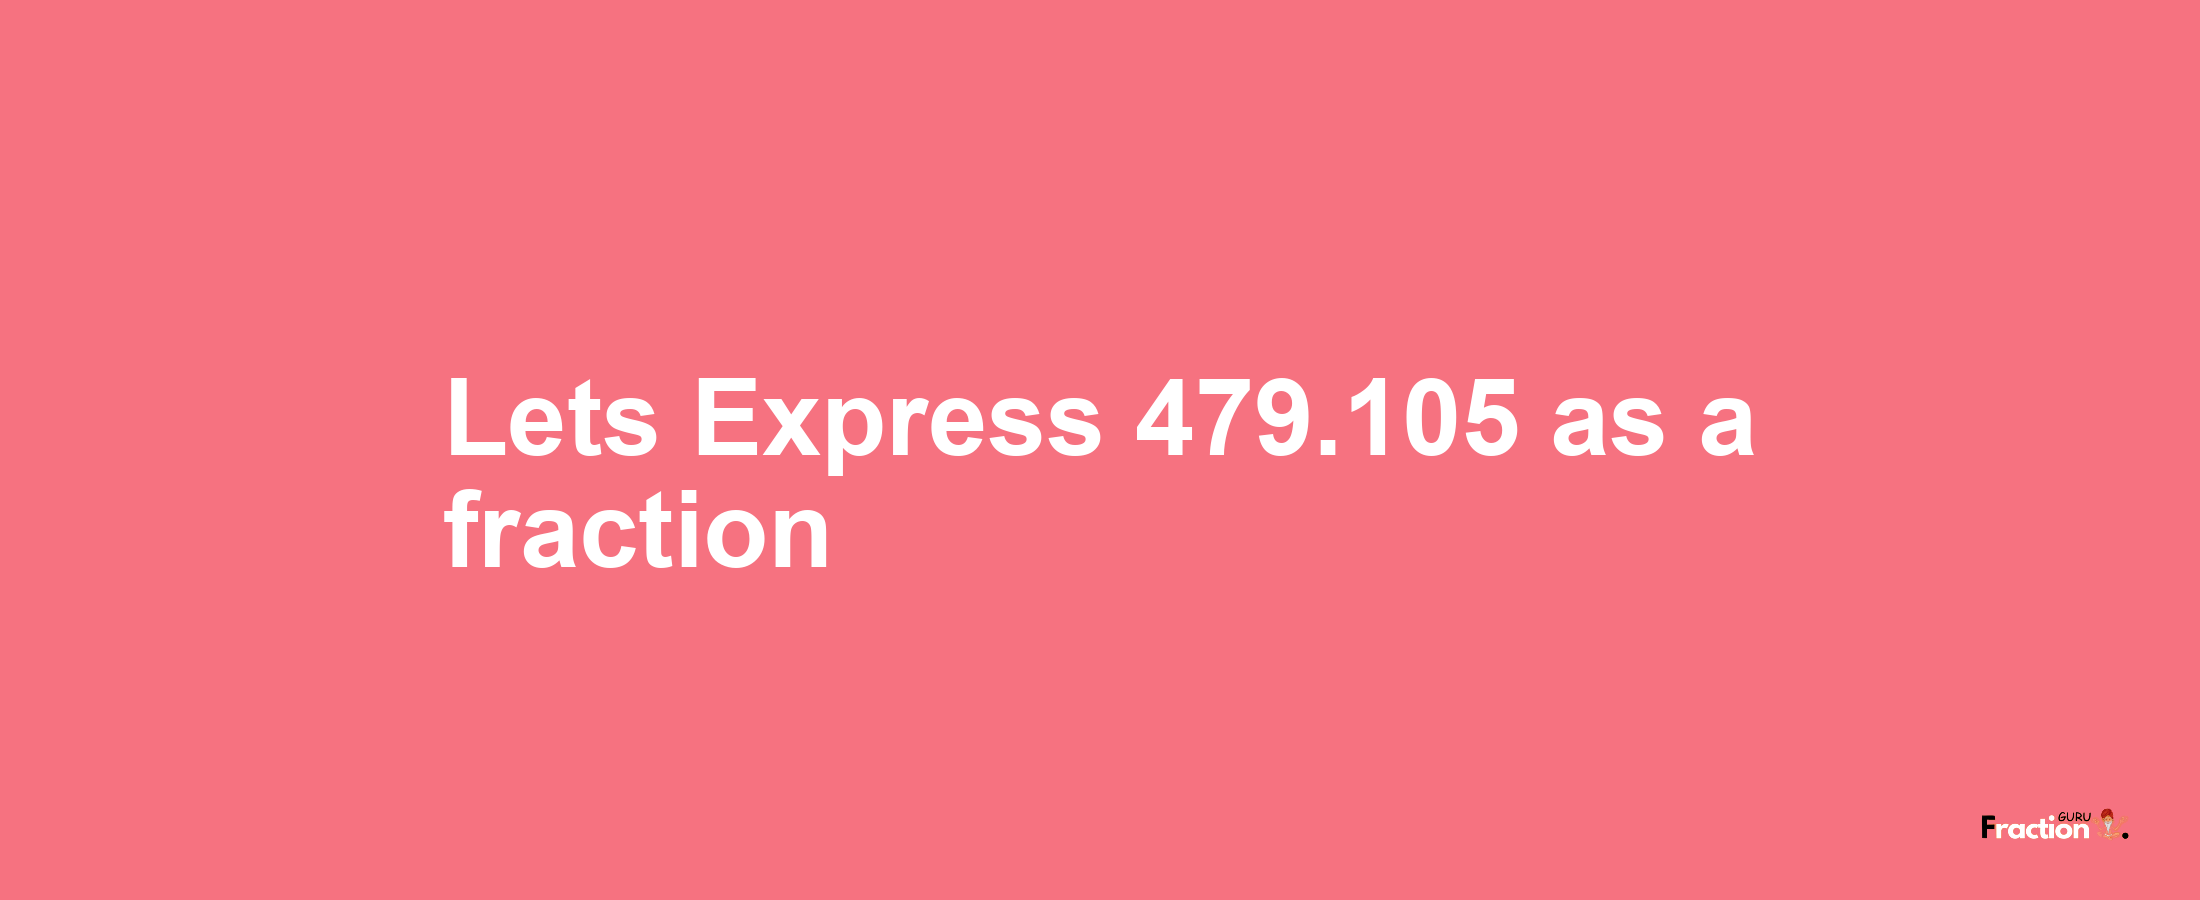 Lets Express 479.105 as afraction